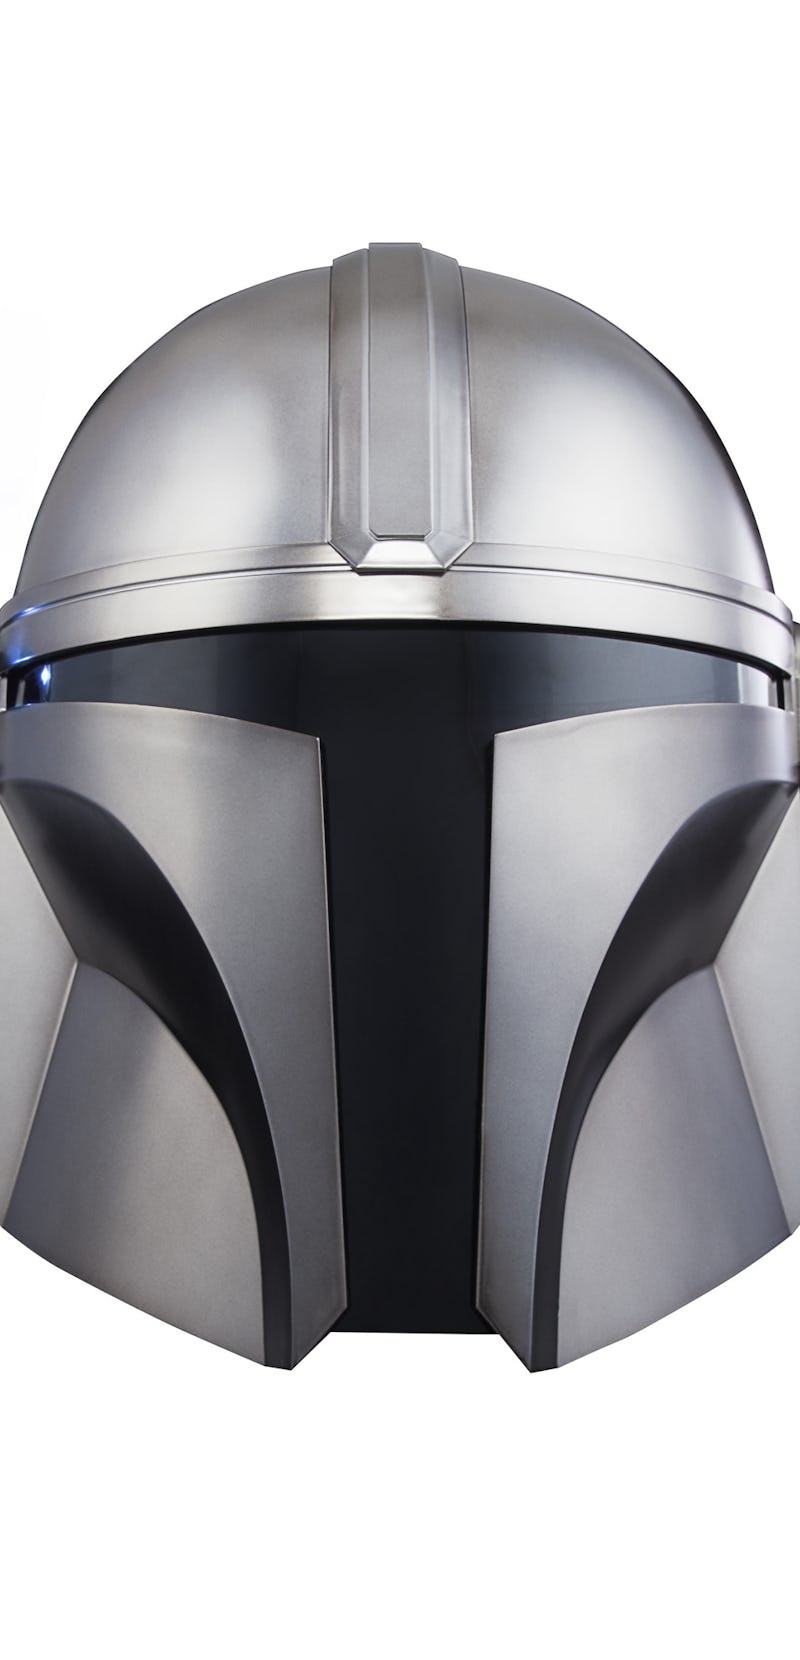 The Mandalorian helmet from Hasbro sells for $119.99 and will go on sale in Spring 2021.